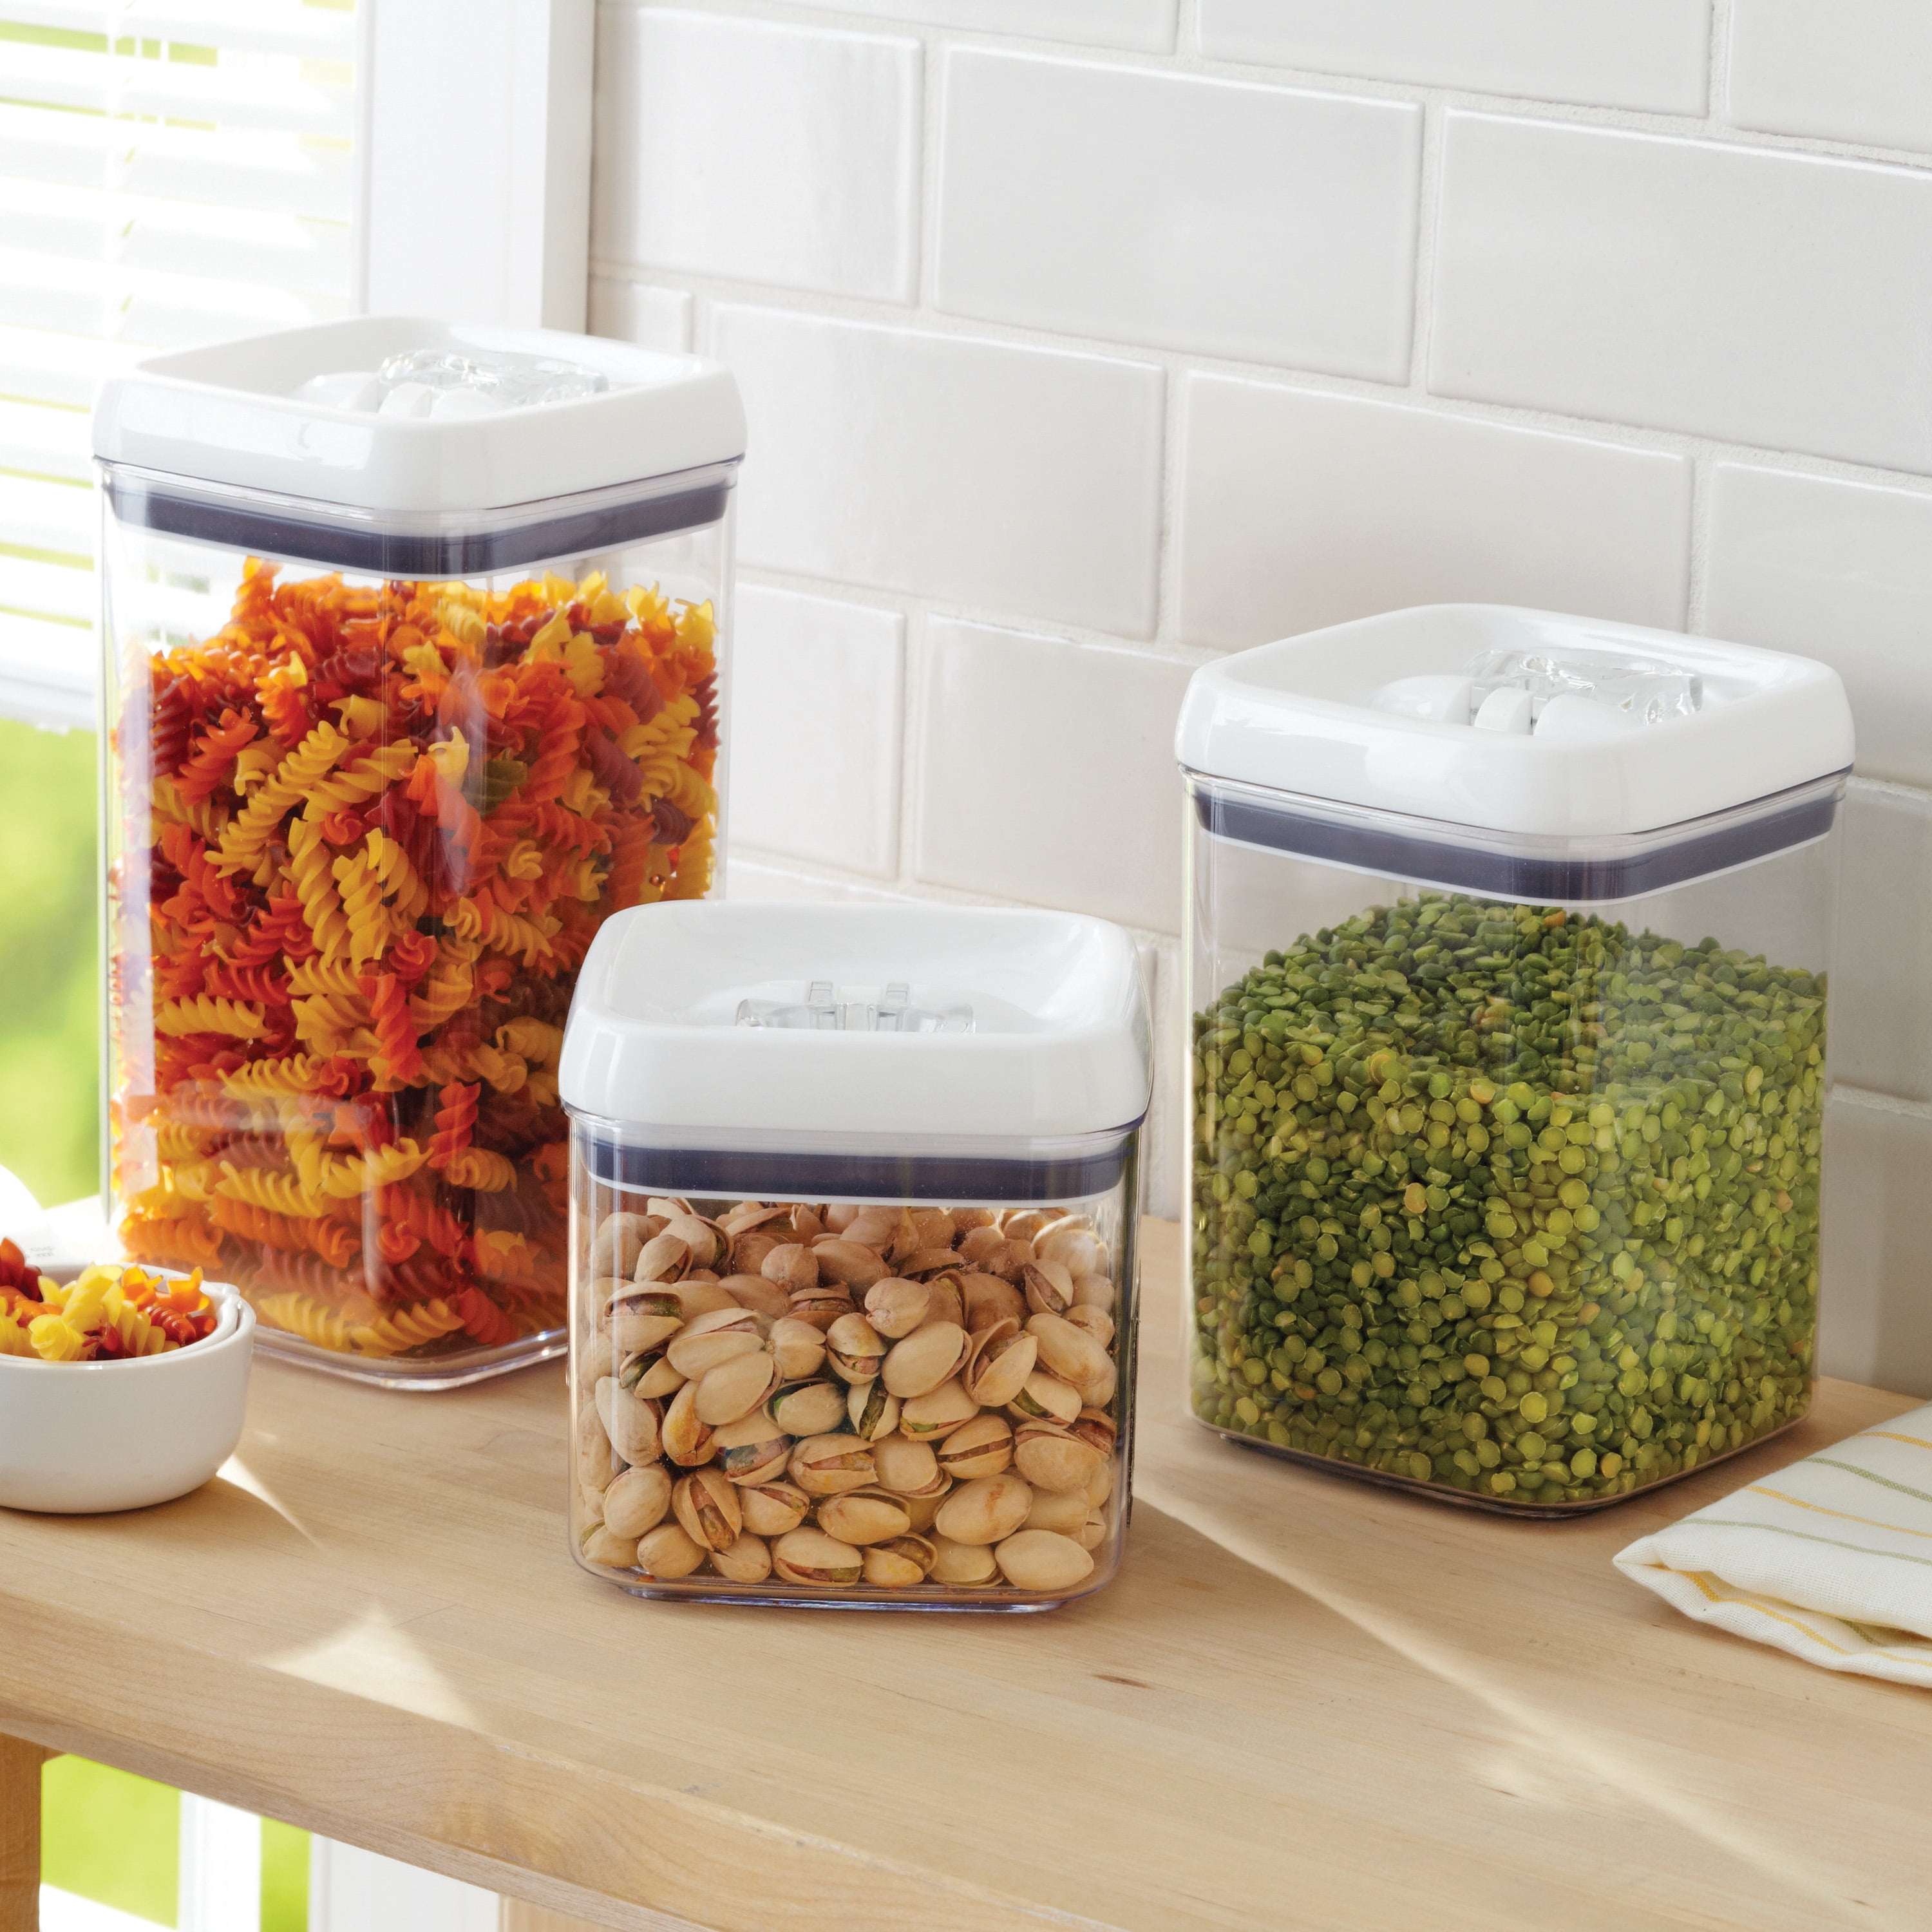 Pack of 3 - Flip-Tite Square Food Storage Container Set, 4.5-cup